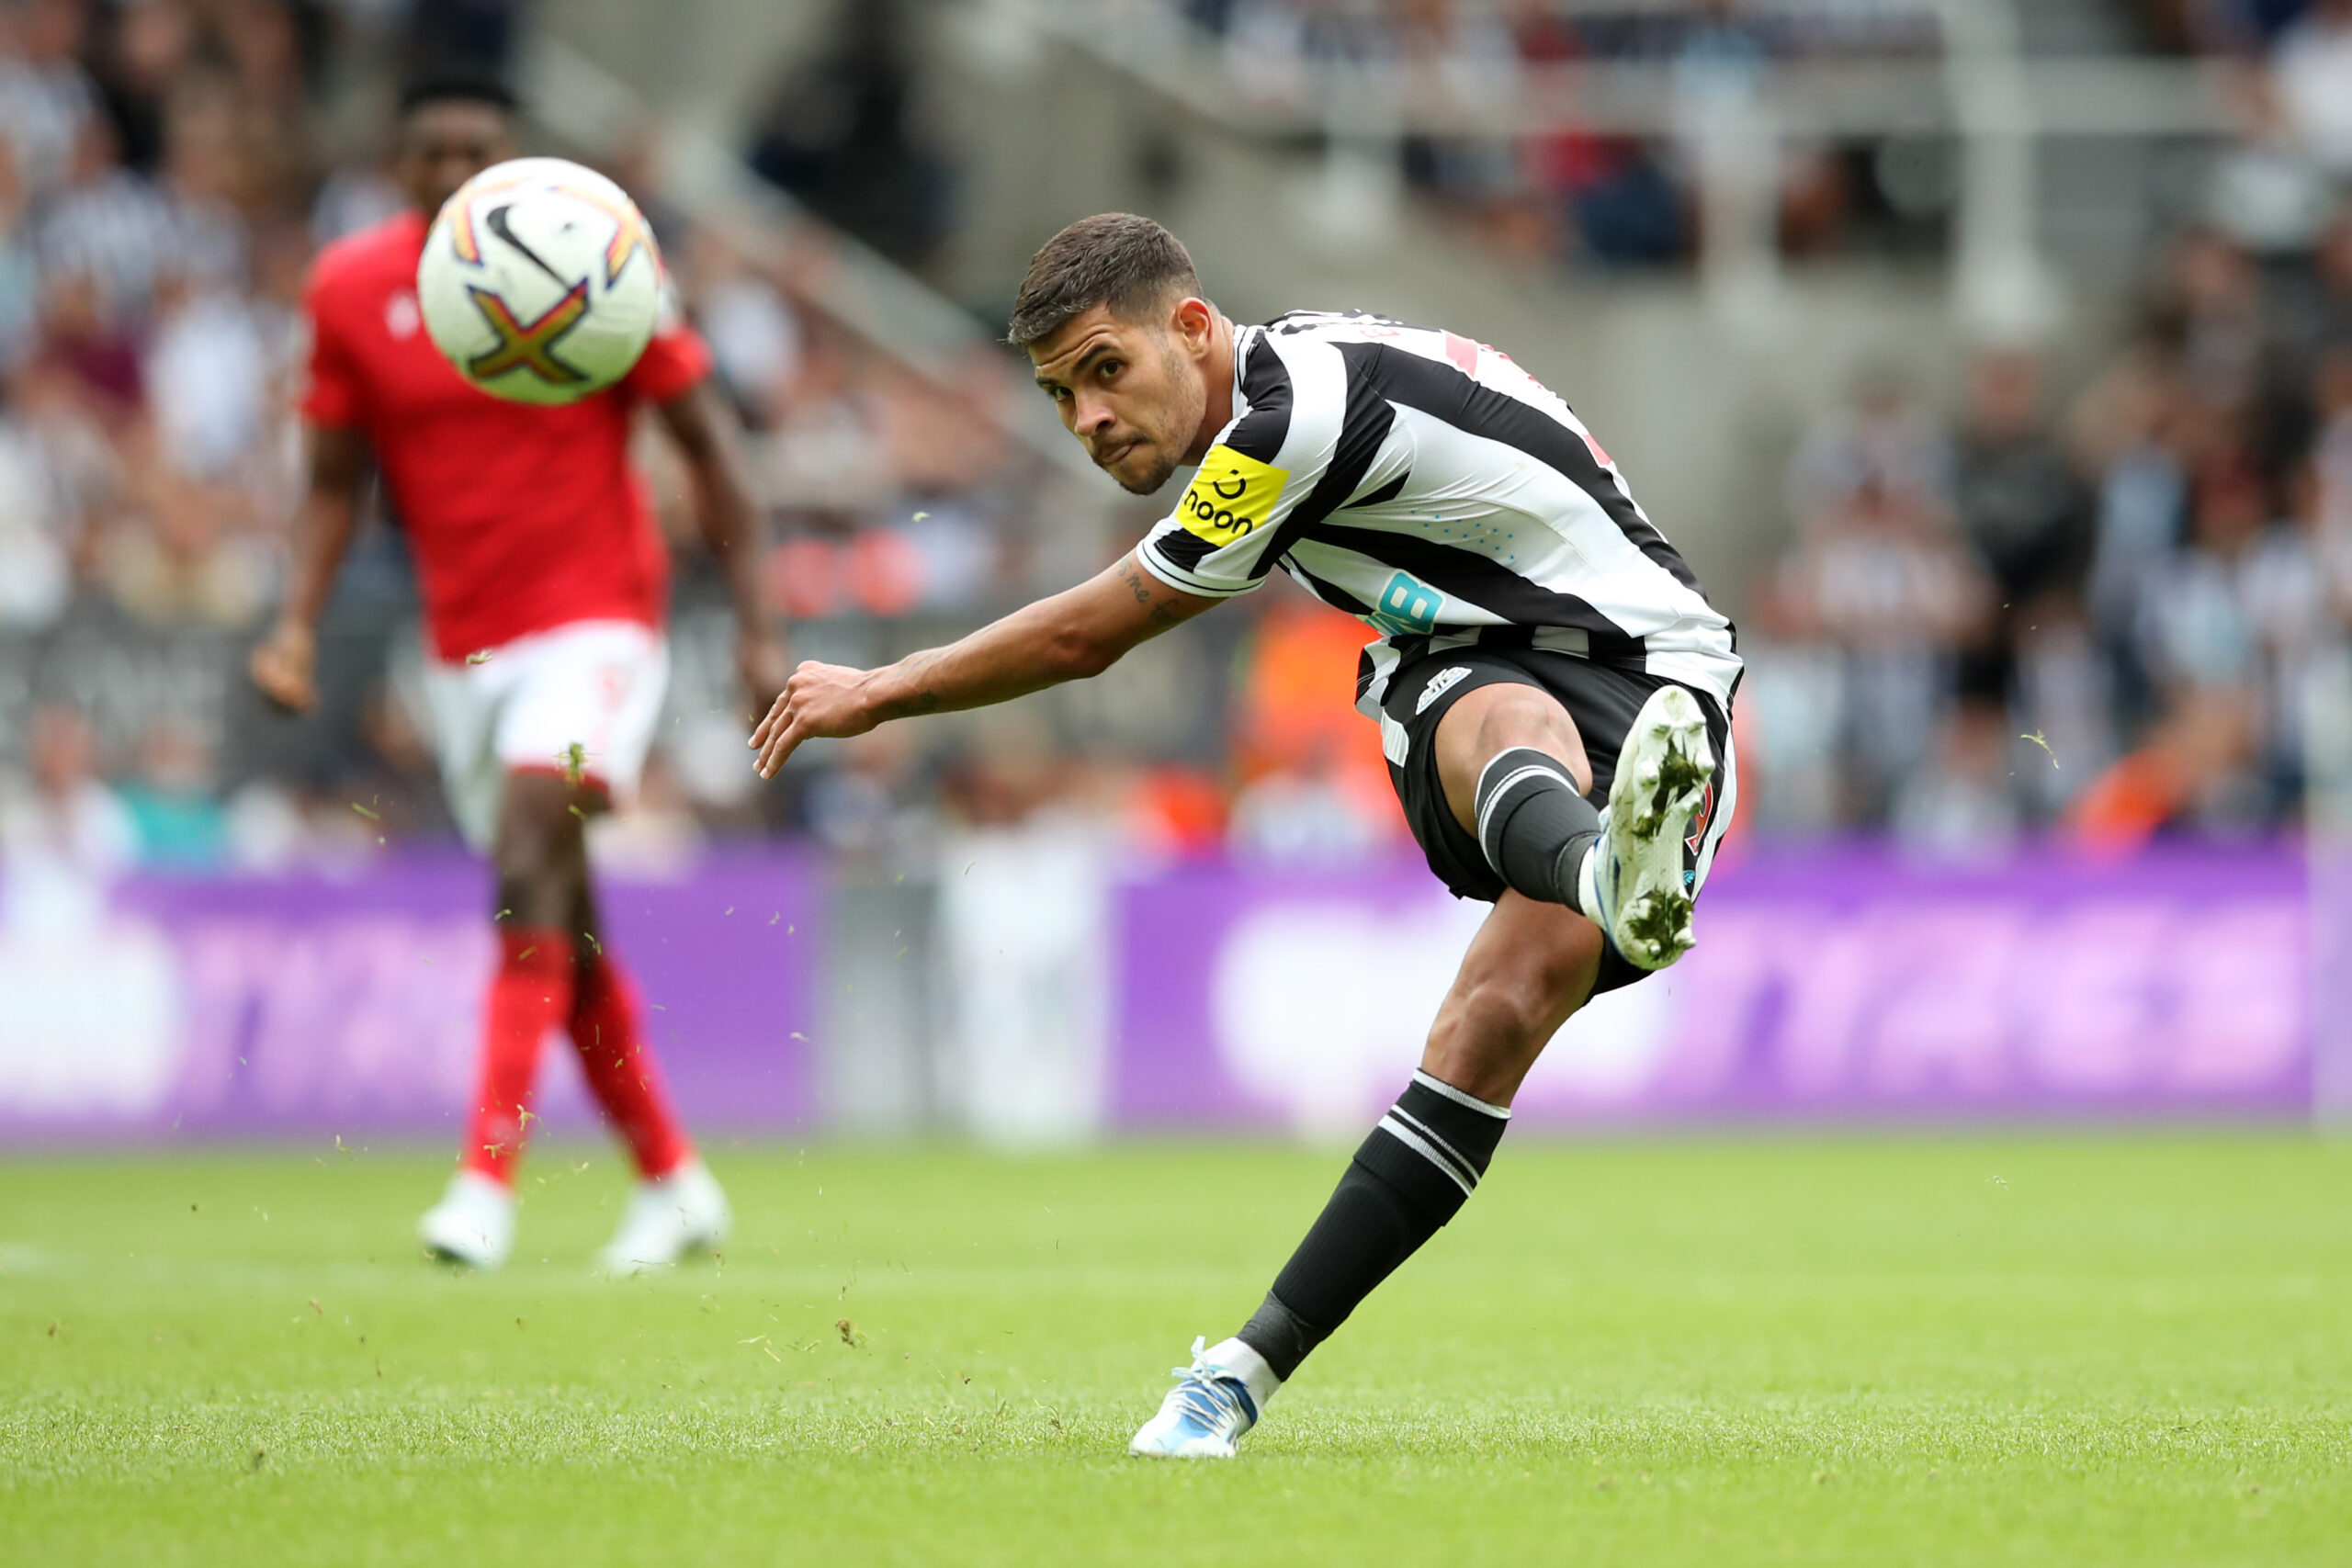  Bruno Guimaraes in action during a match between Newcastle United and Nottingham Forest, with the backdrop of the stadium stands.